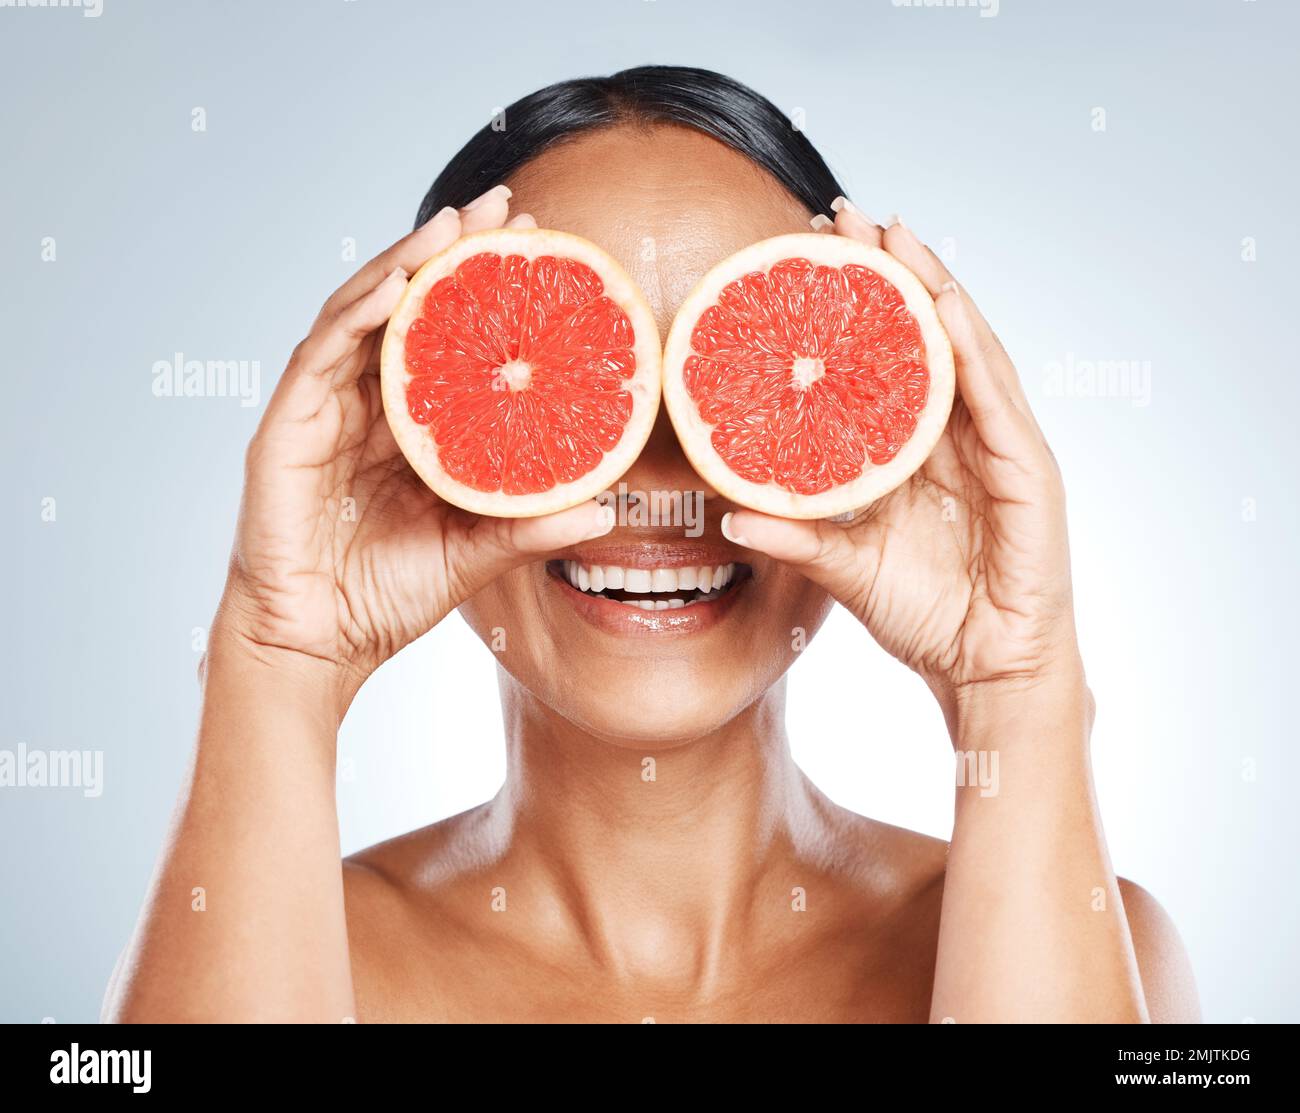 Funny, fruit and woman use grapefruit for a joke covering her eyes isolated against a studio blue background. Health, beauty and skincare model Stock Photo